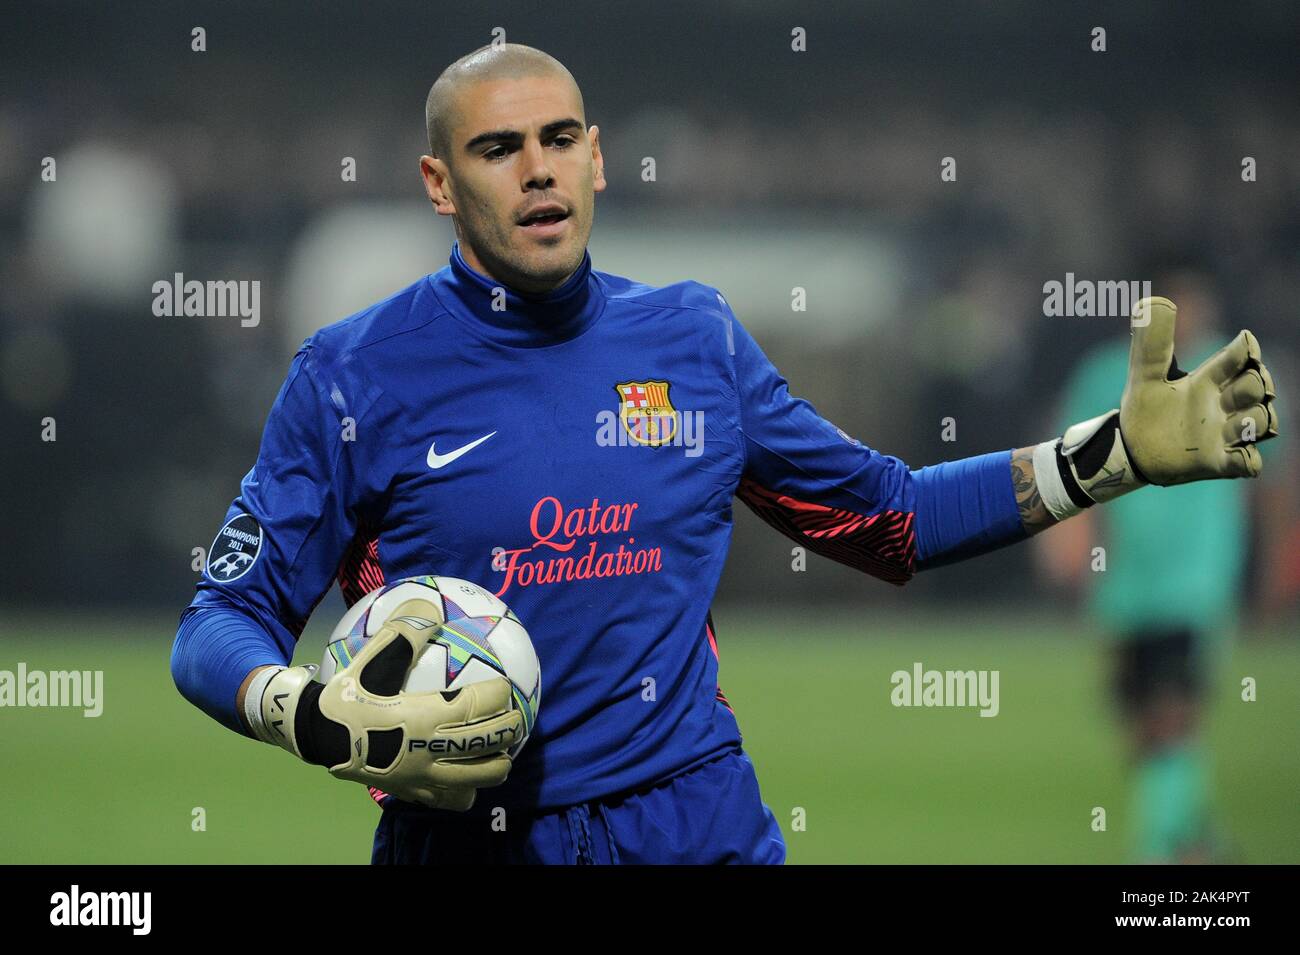 Milan Italy ,23 NOVEMBER 2011, 'G.Meazza  San Siro' Stadium, UEFA Champions League 2011/2012, AC Milan - FC Barcelona: Victor Valdes in action during the match Stock Photo